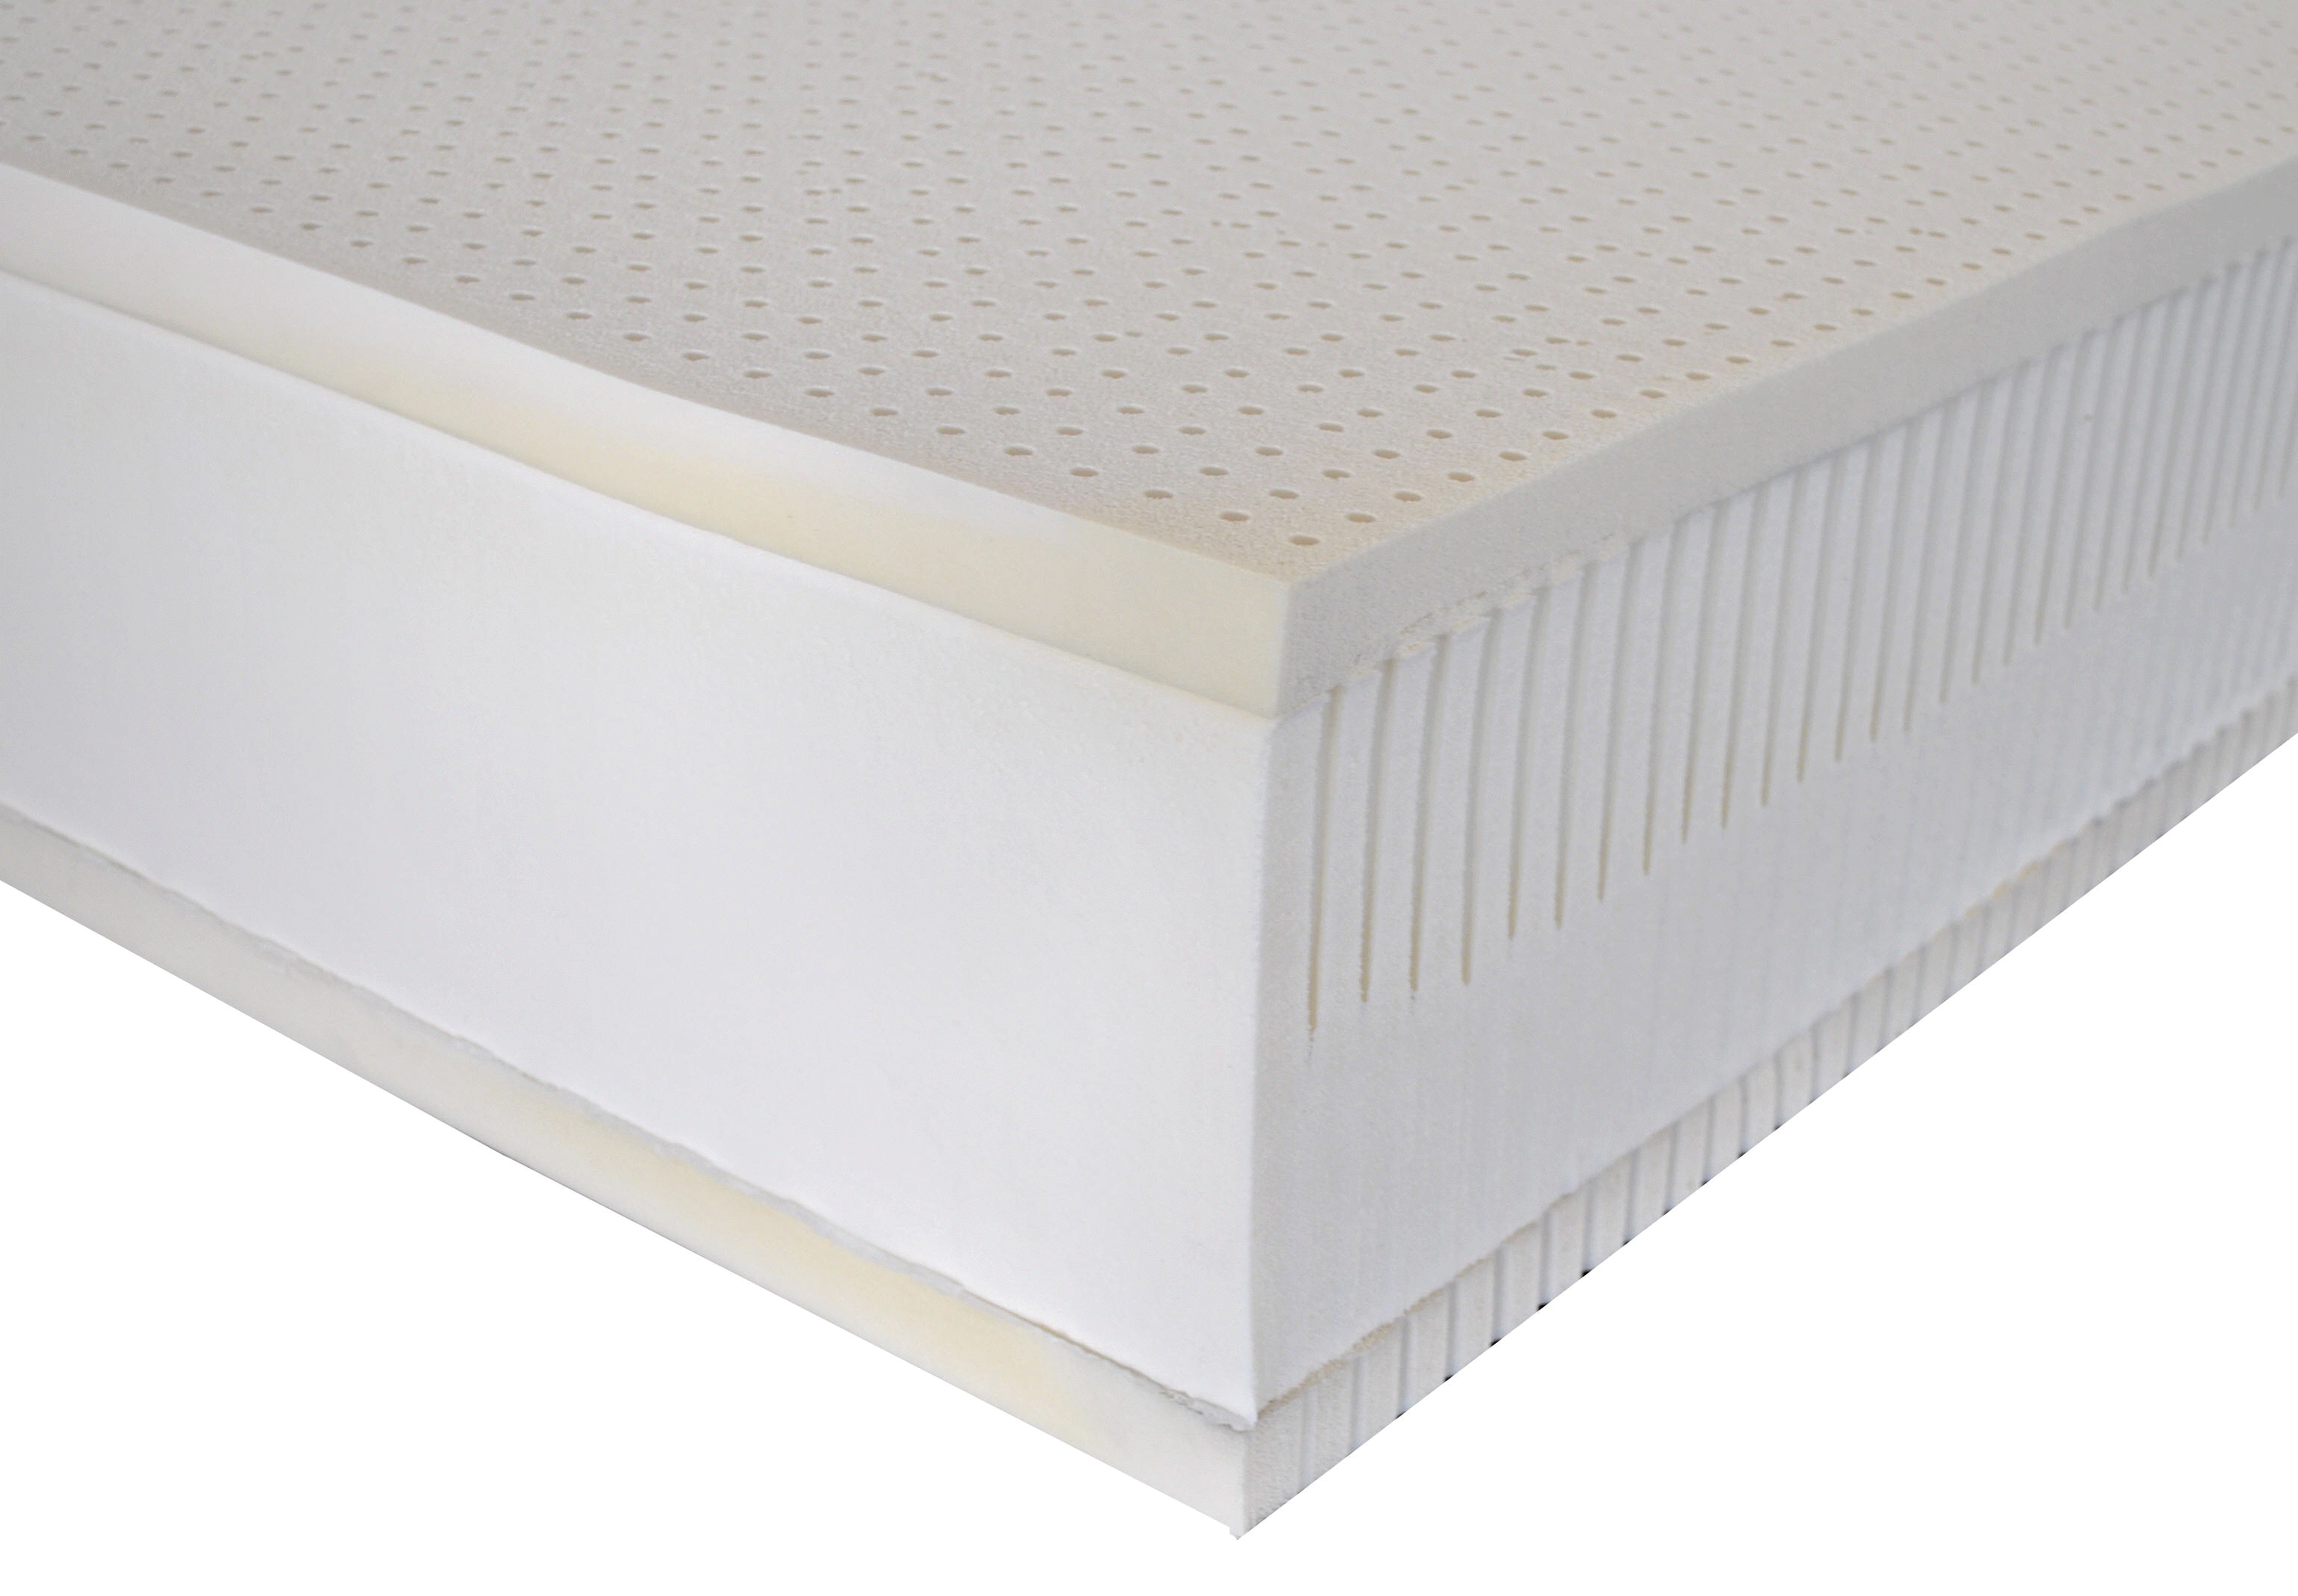 high profile deluxe best quality latex mattress natural organic bed adjustable electric